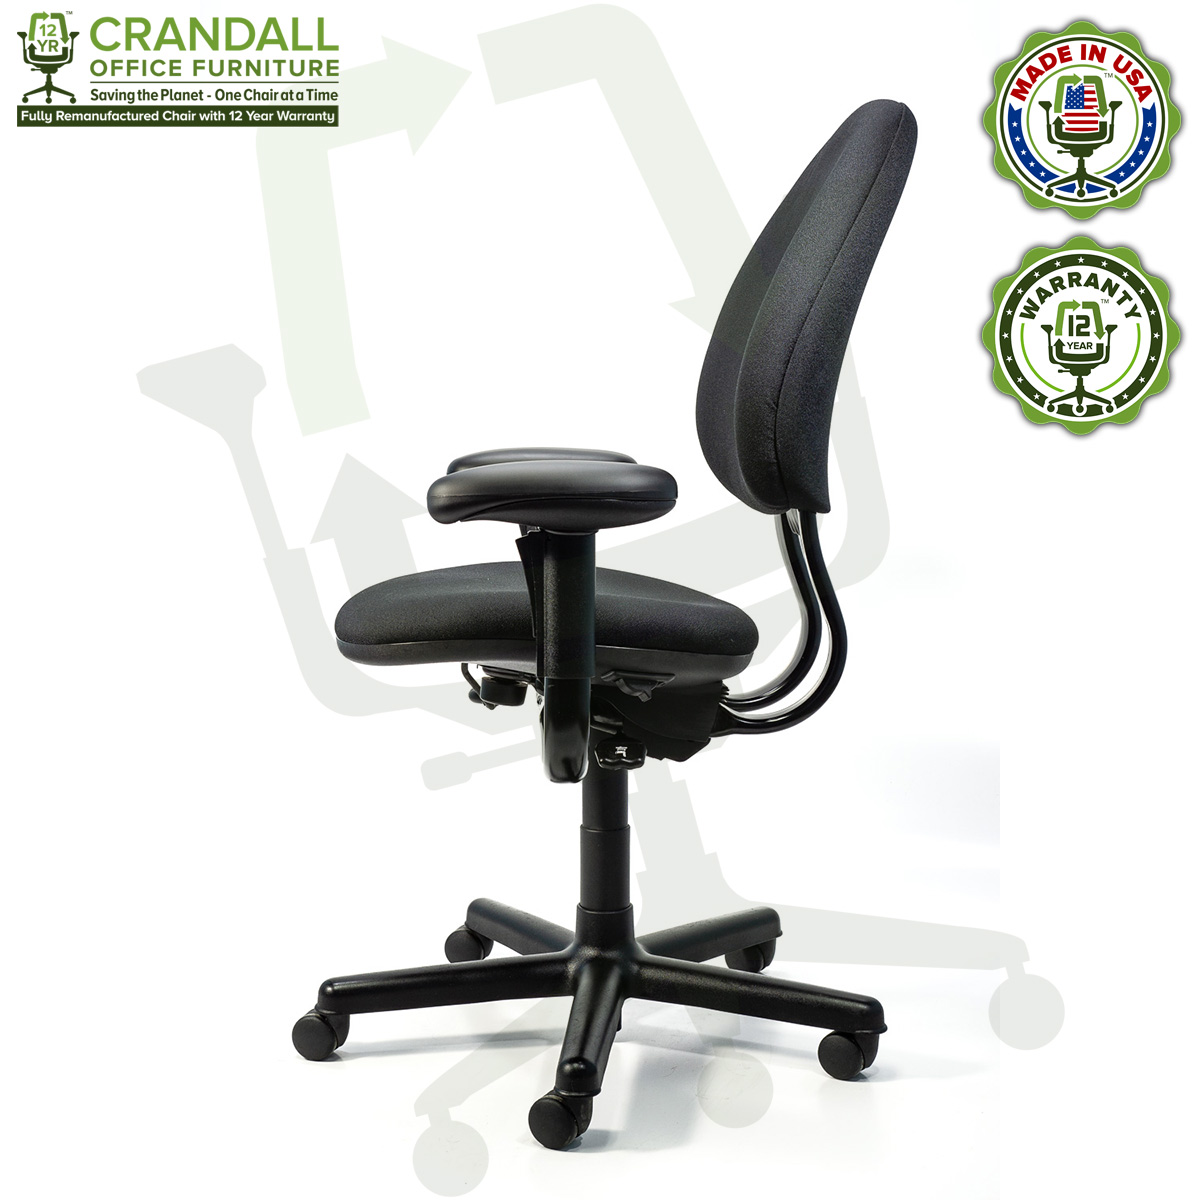 Crandall Office Furniture Remanufactured Steelcase Criterion Chair with 12 Year Warranty - 03